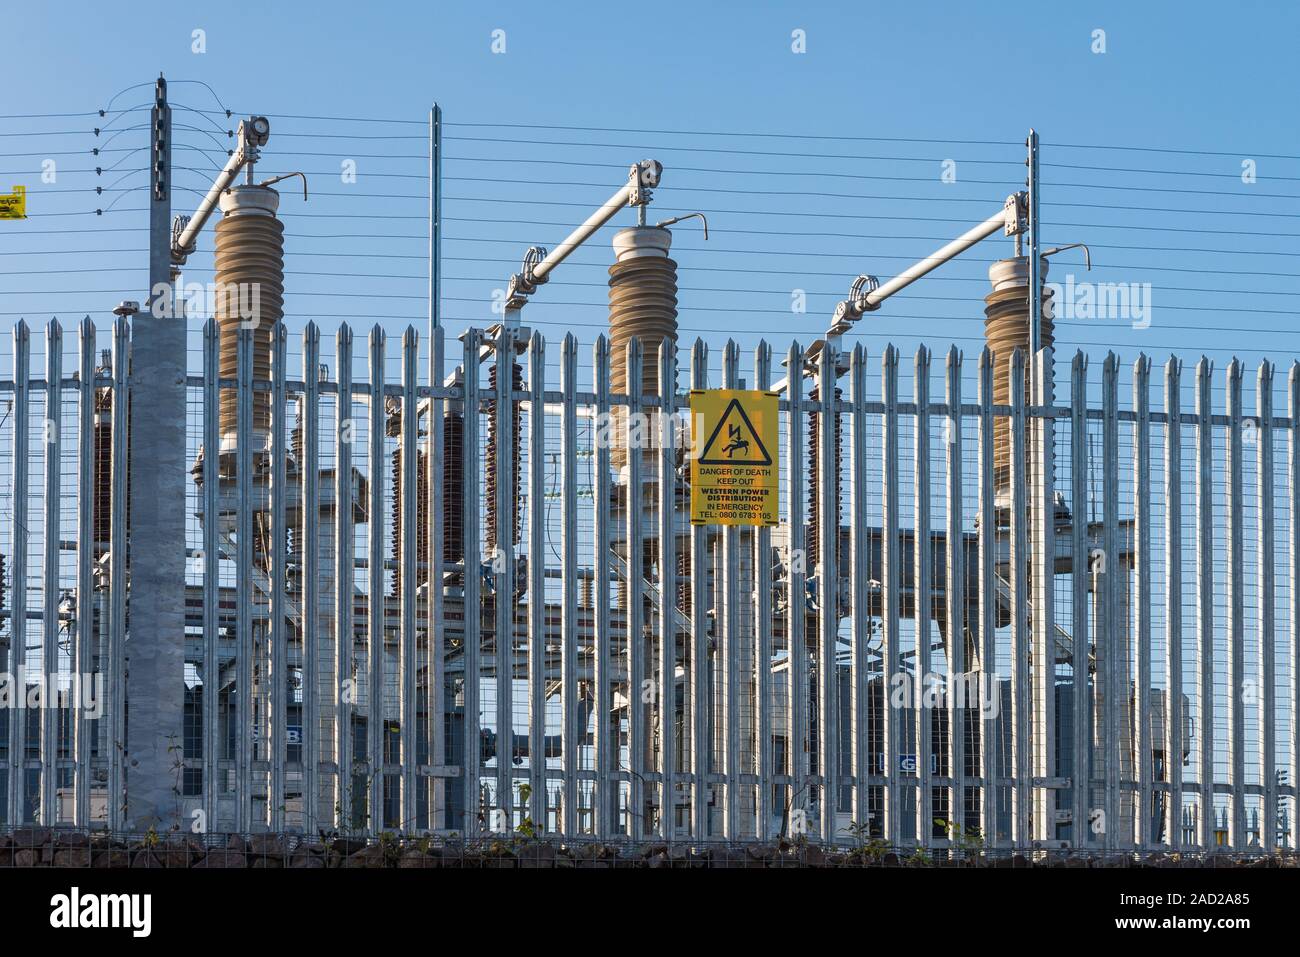 Electricity generator power sub-station with yellow danger of death sign Stock Photo